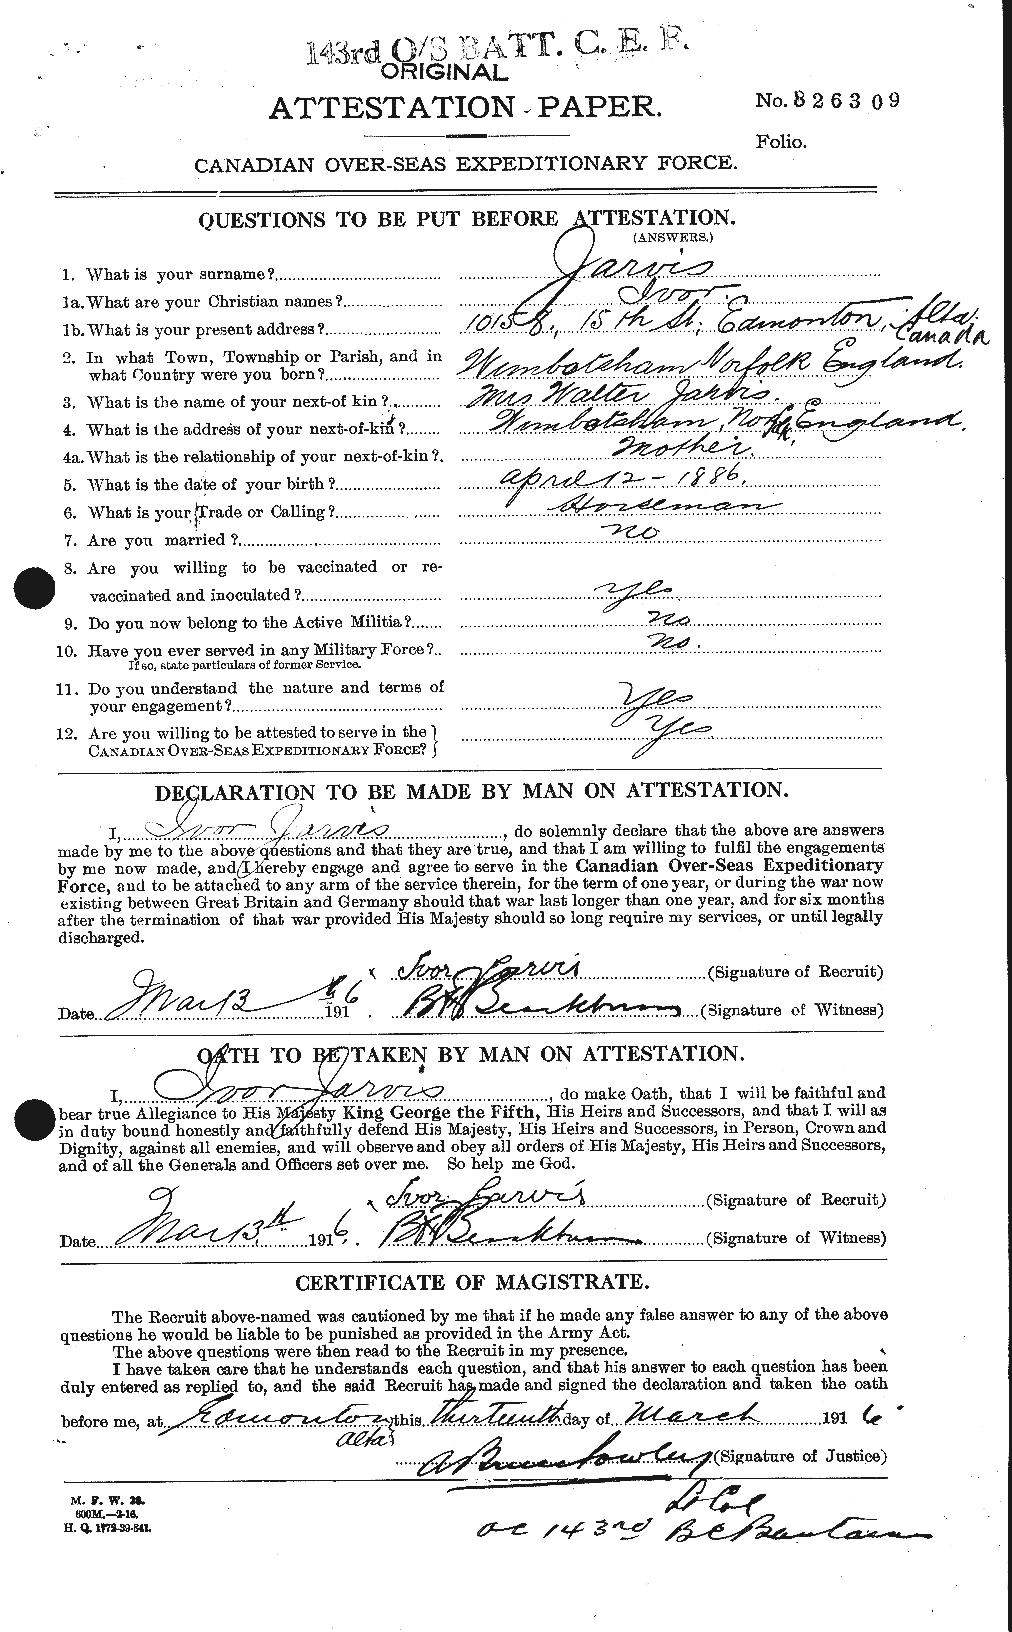 Personnel Records of the First World War - CEF 414739a